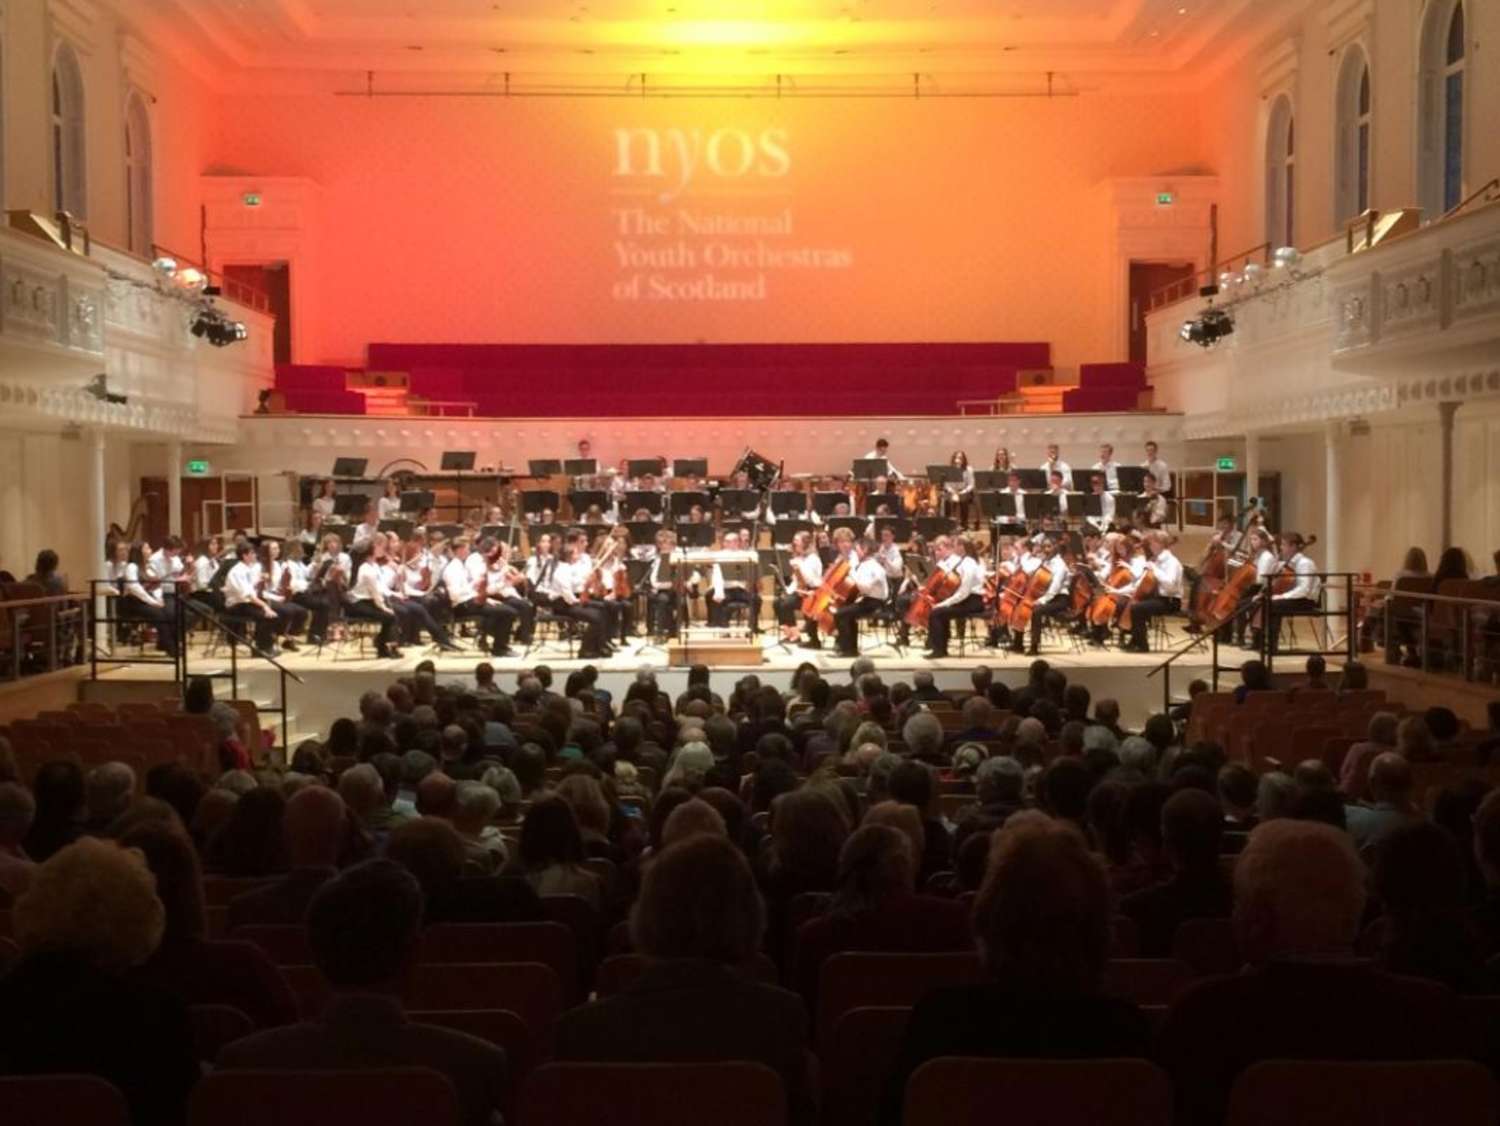 Great audience to watch NYOS Senior Orchestra perform at Glasgow's City Halls, April 2017